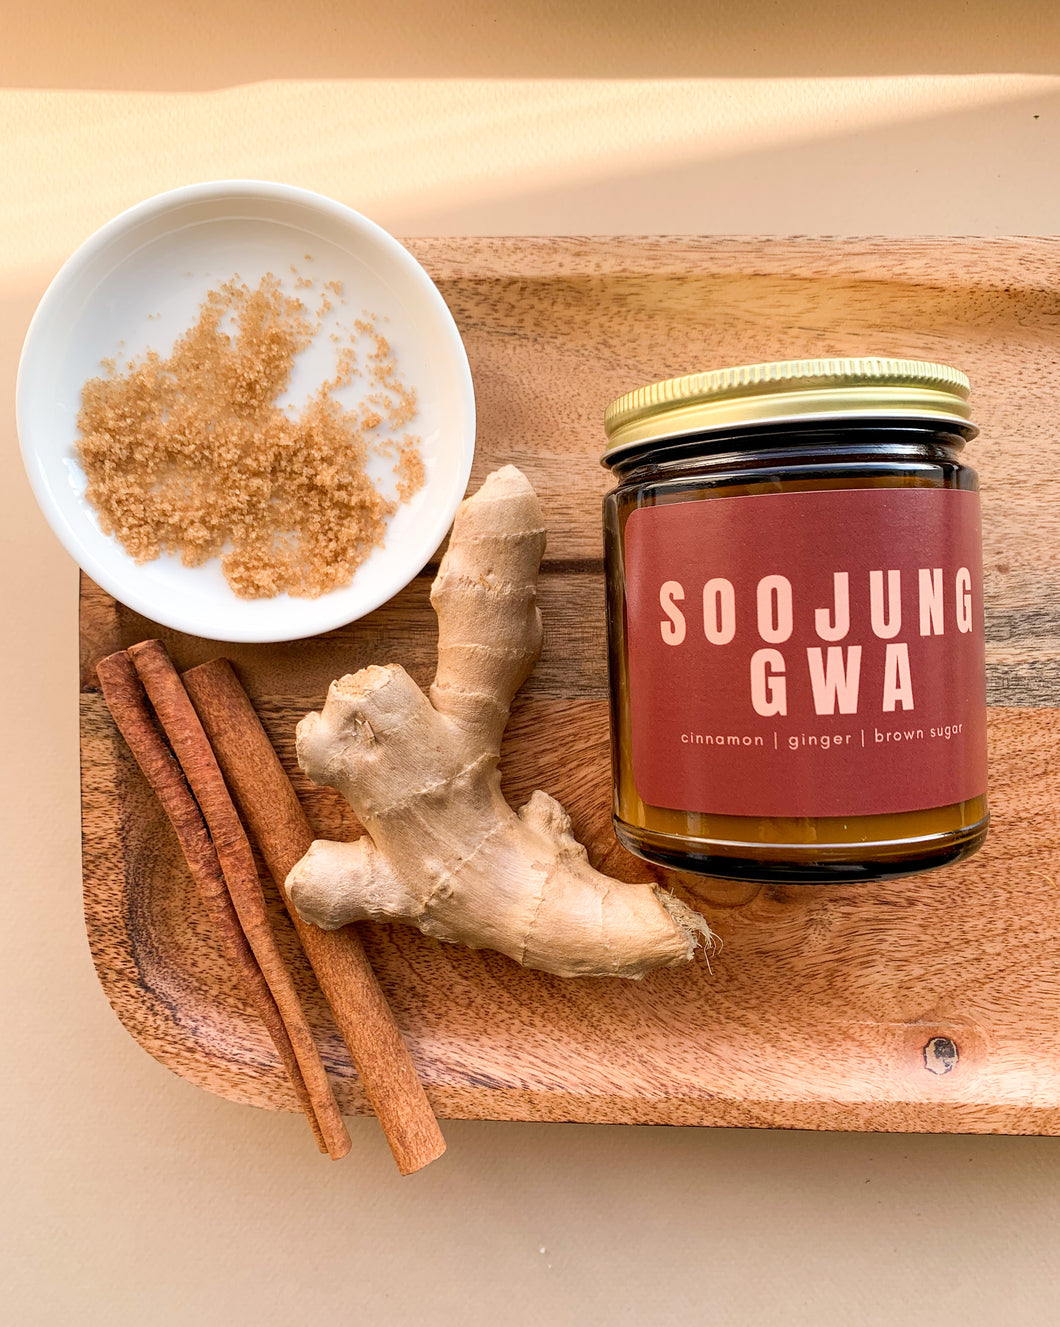 SOOJUNGGWA - asian inspired soy wax scented candle - warm spicy scented candle